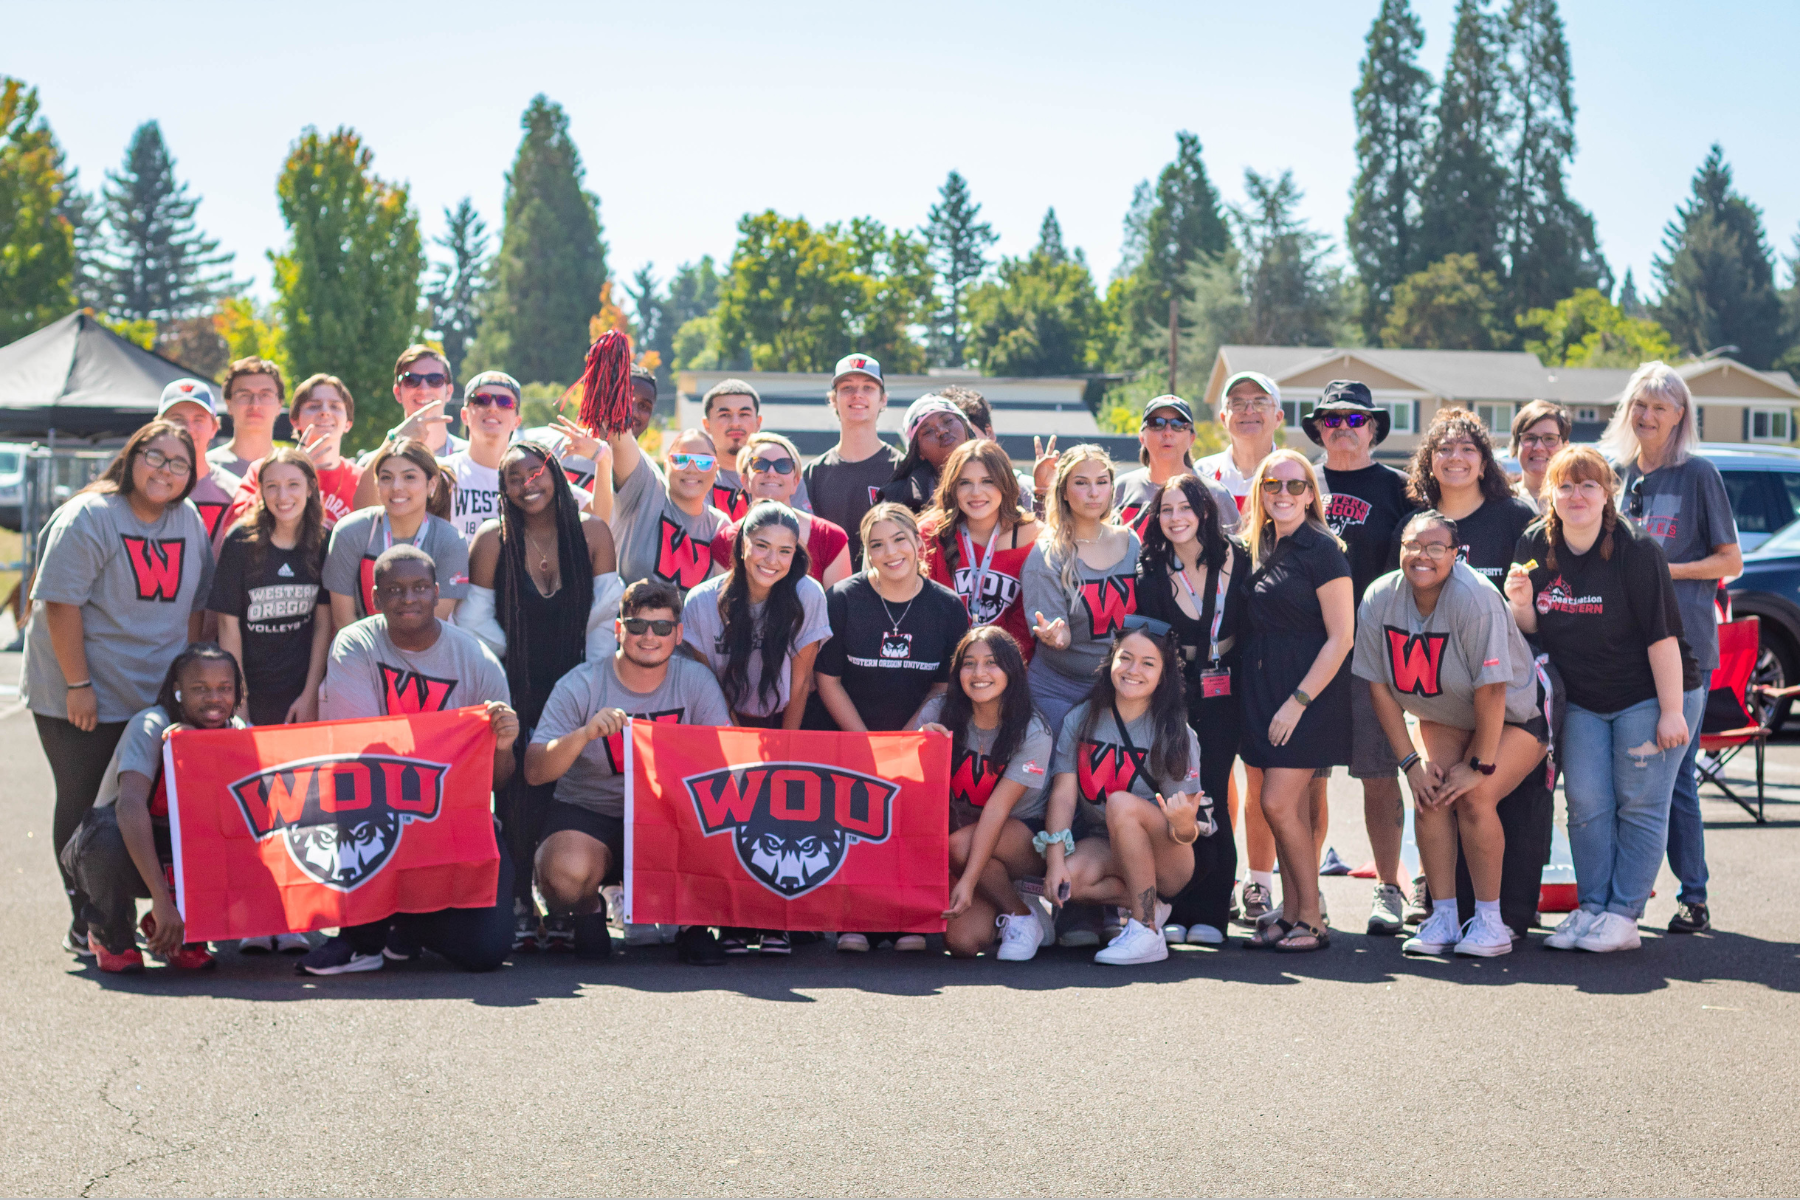 WOU students smiling